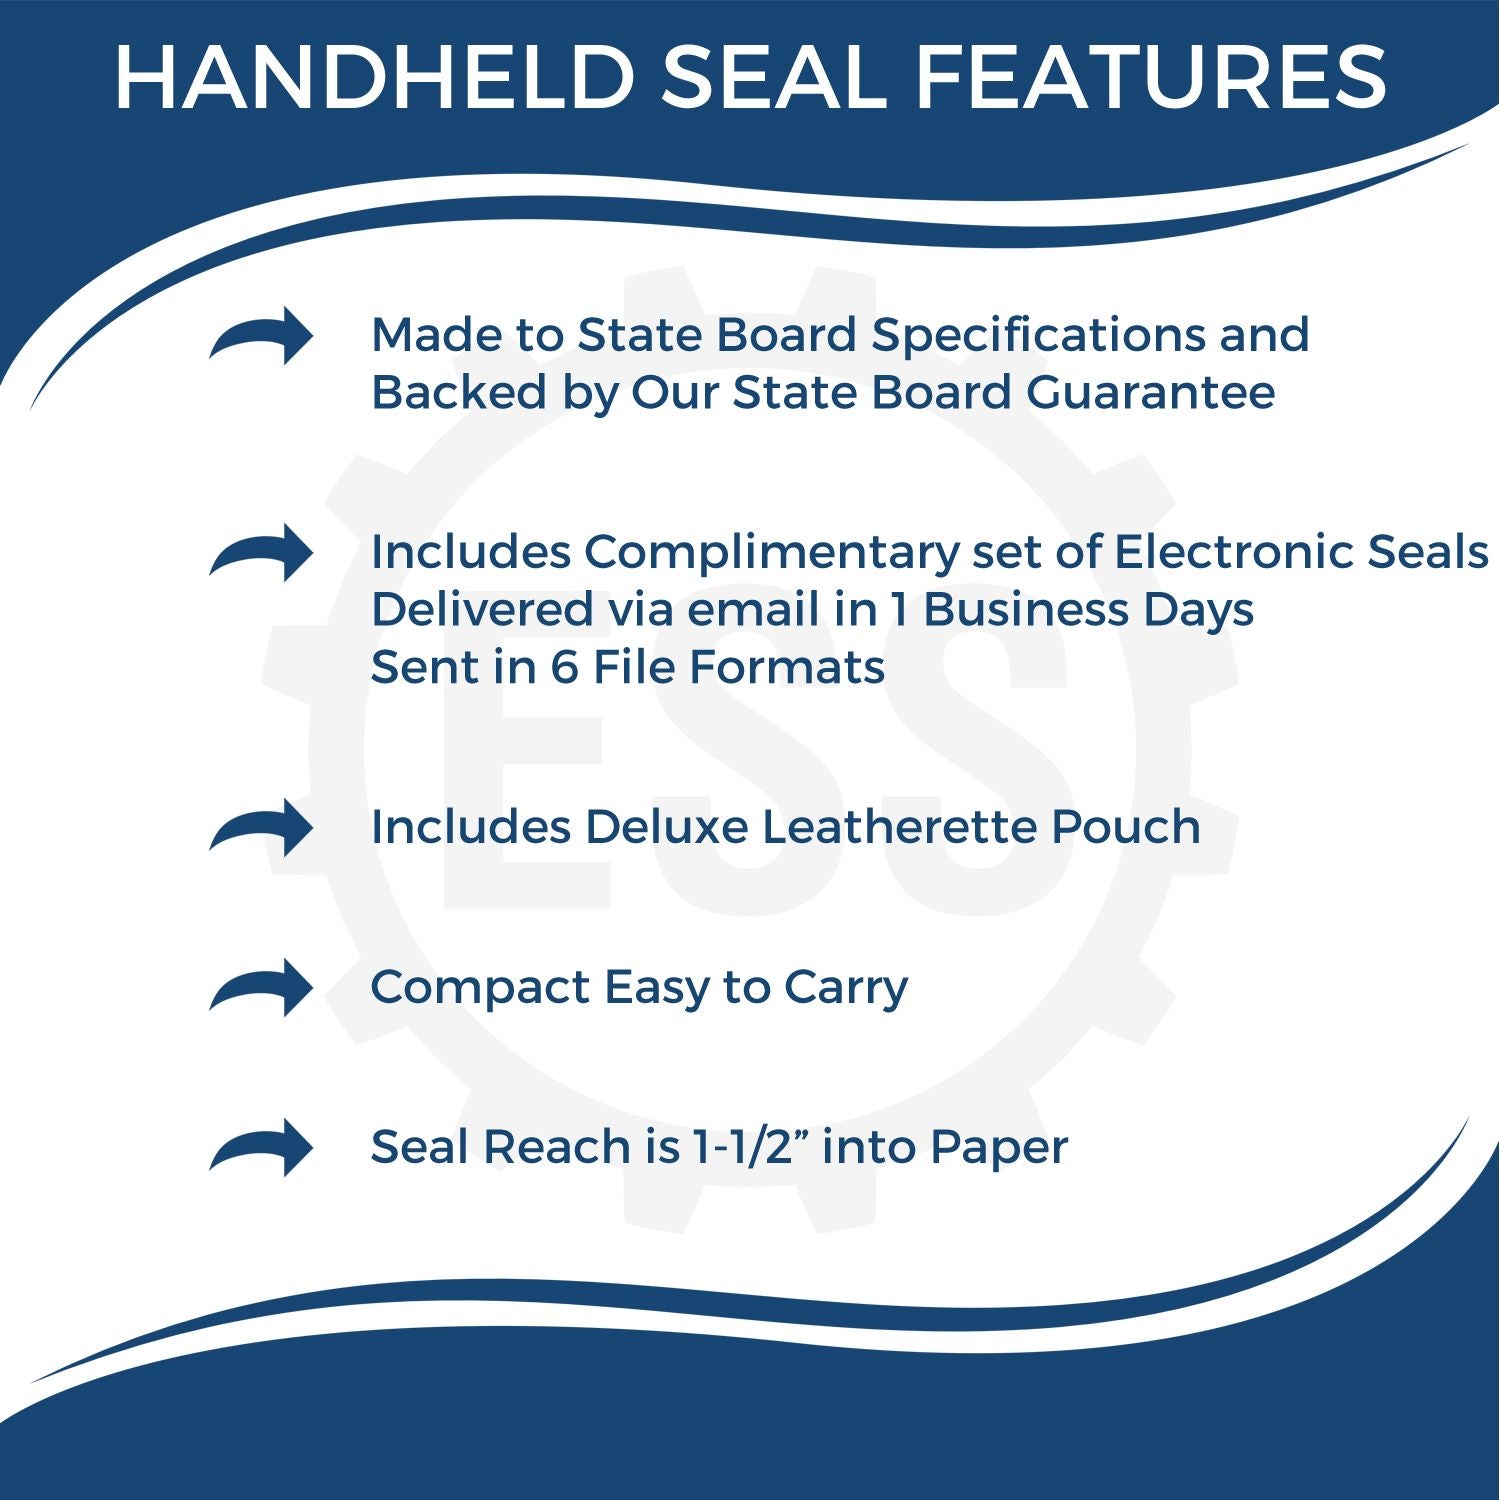 A picture of an infographic highlighting the selling points for the Handheld Virginia Land Surveyor Seal